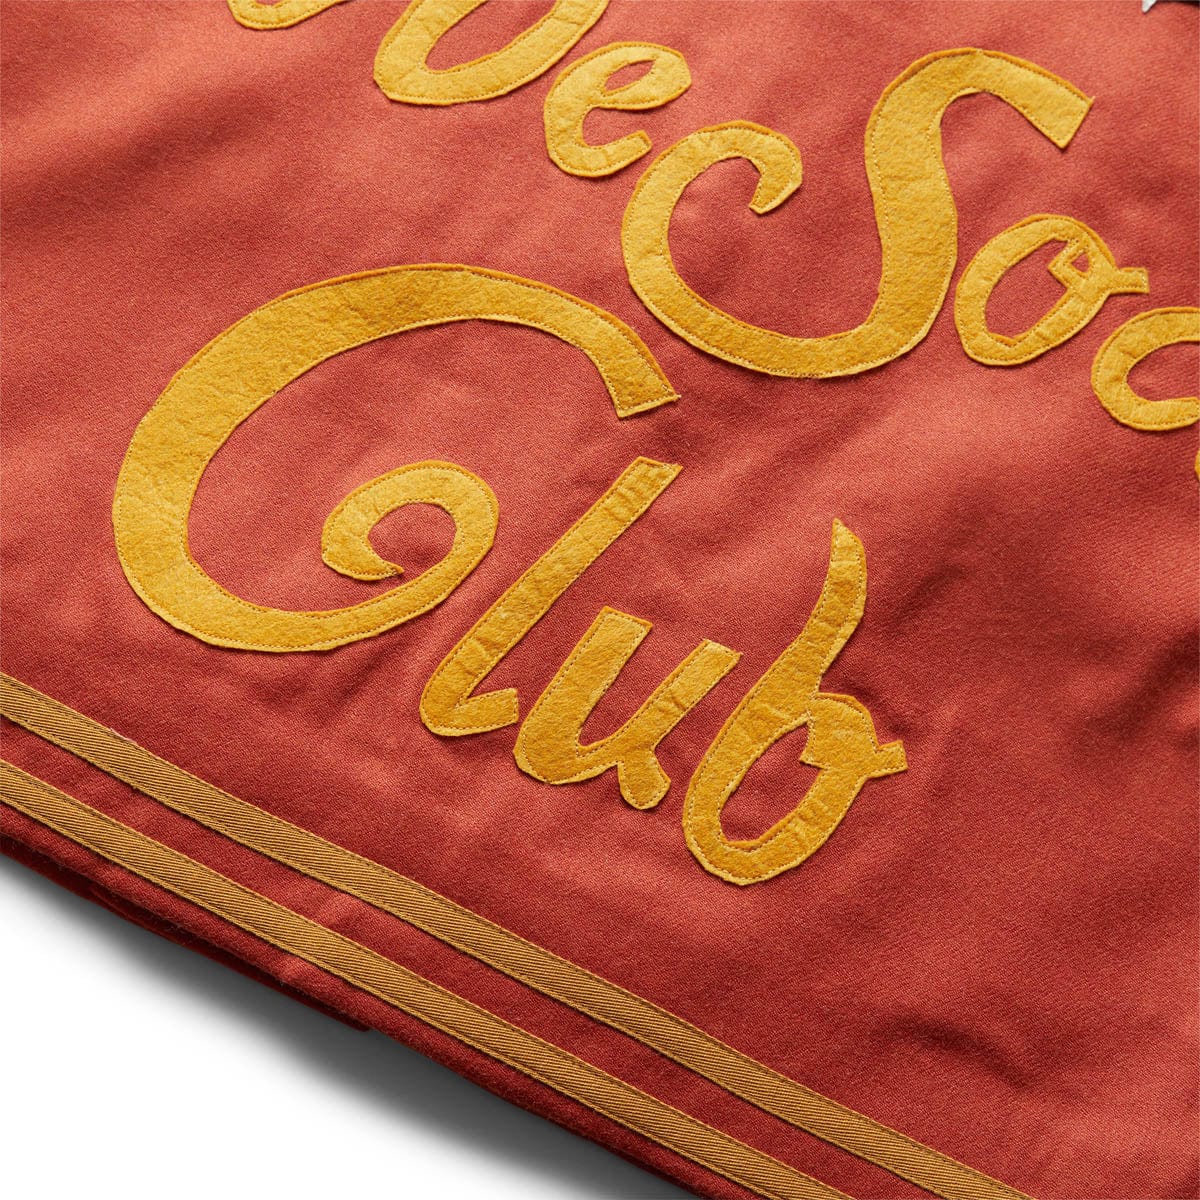 BODE Outerwear SOCIETY CLUB JACKET